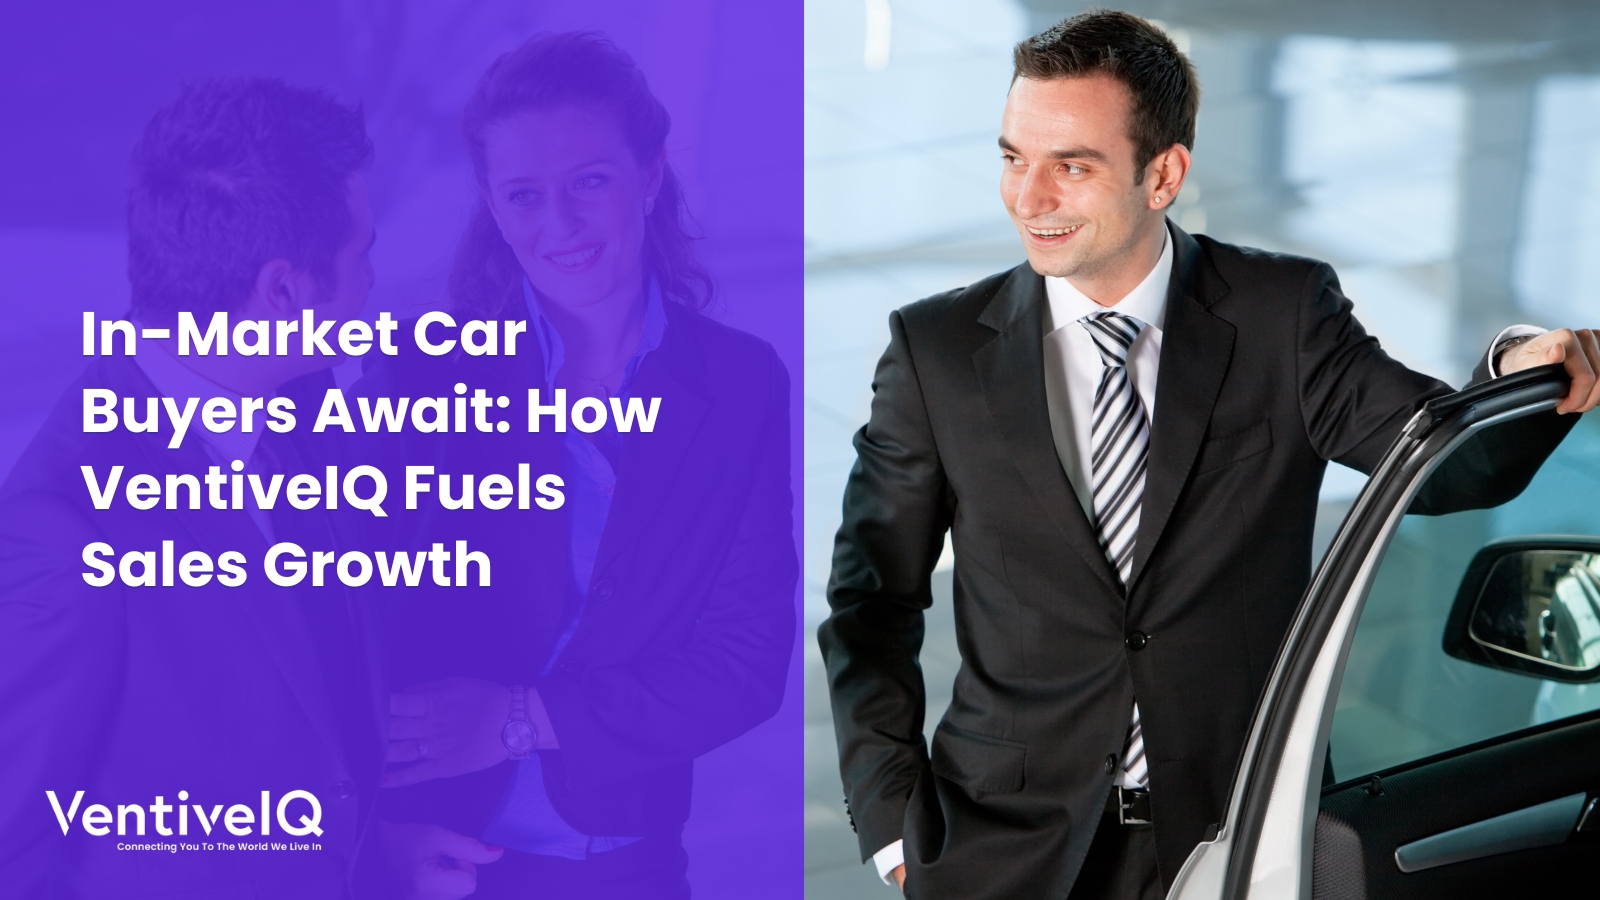 In-Market Car Buyers Await: How VentiveIQ Fuels Sales Growth